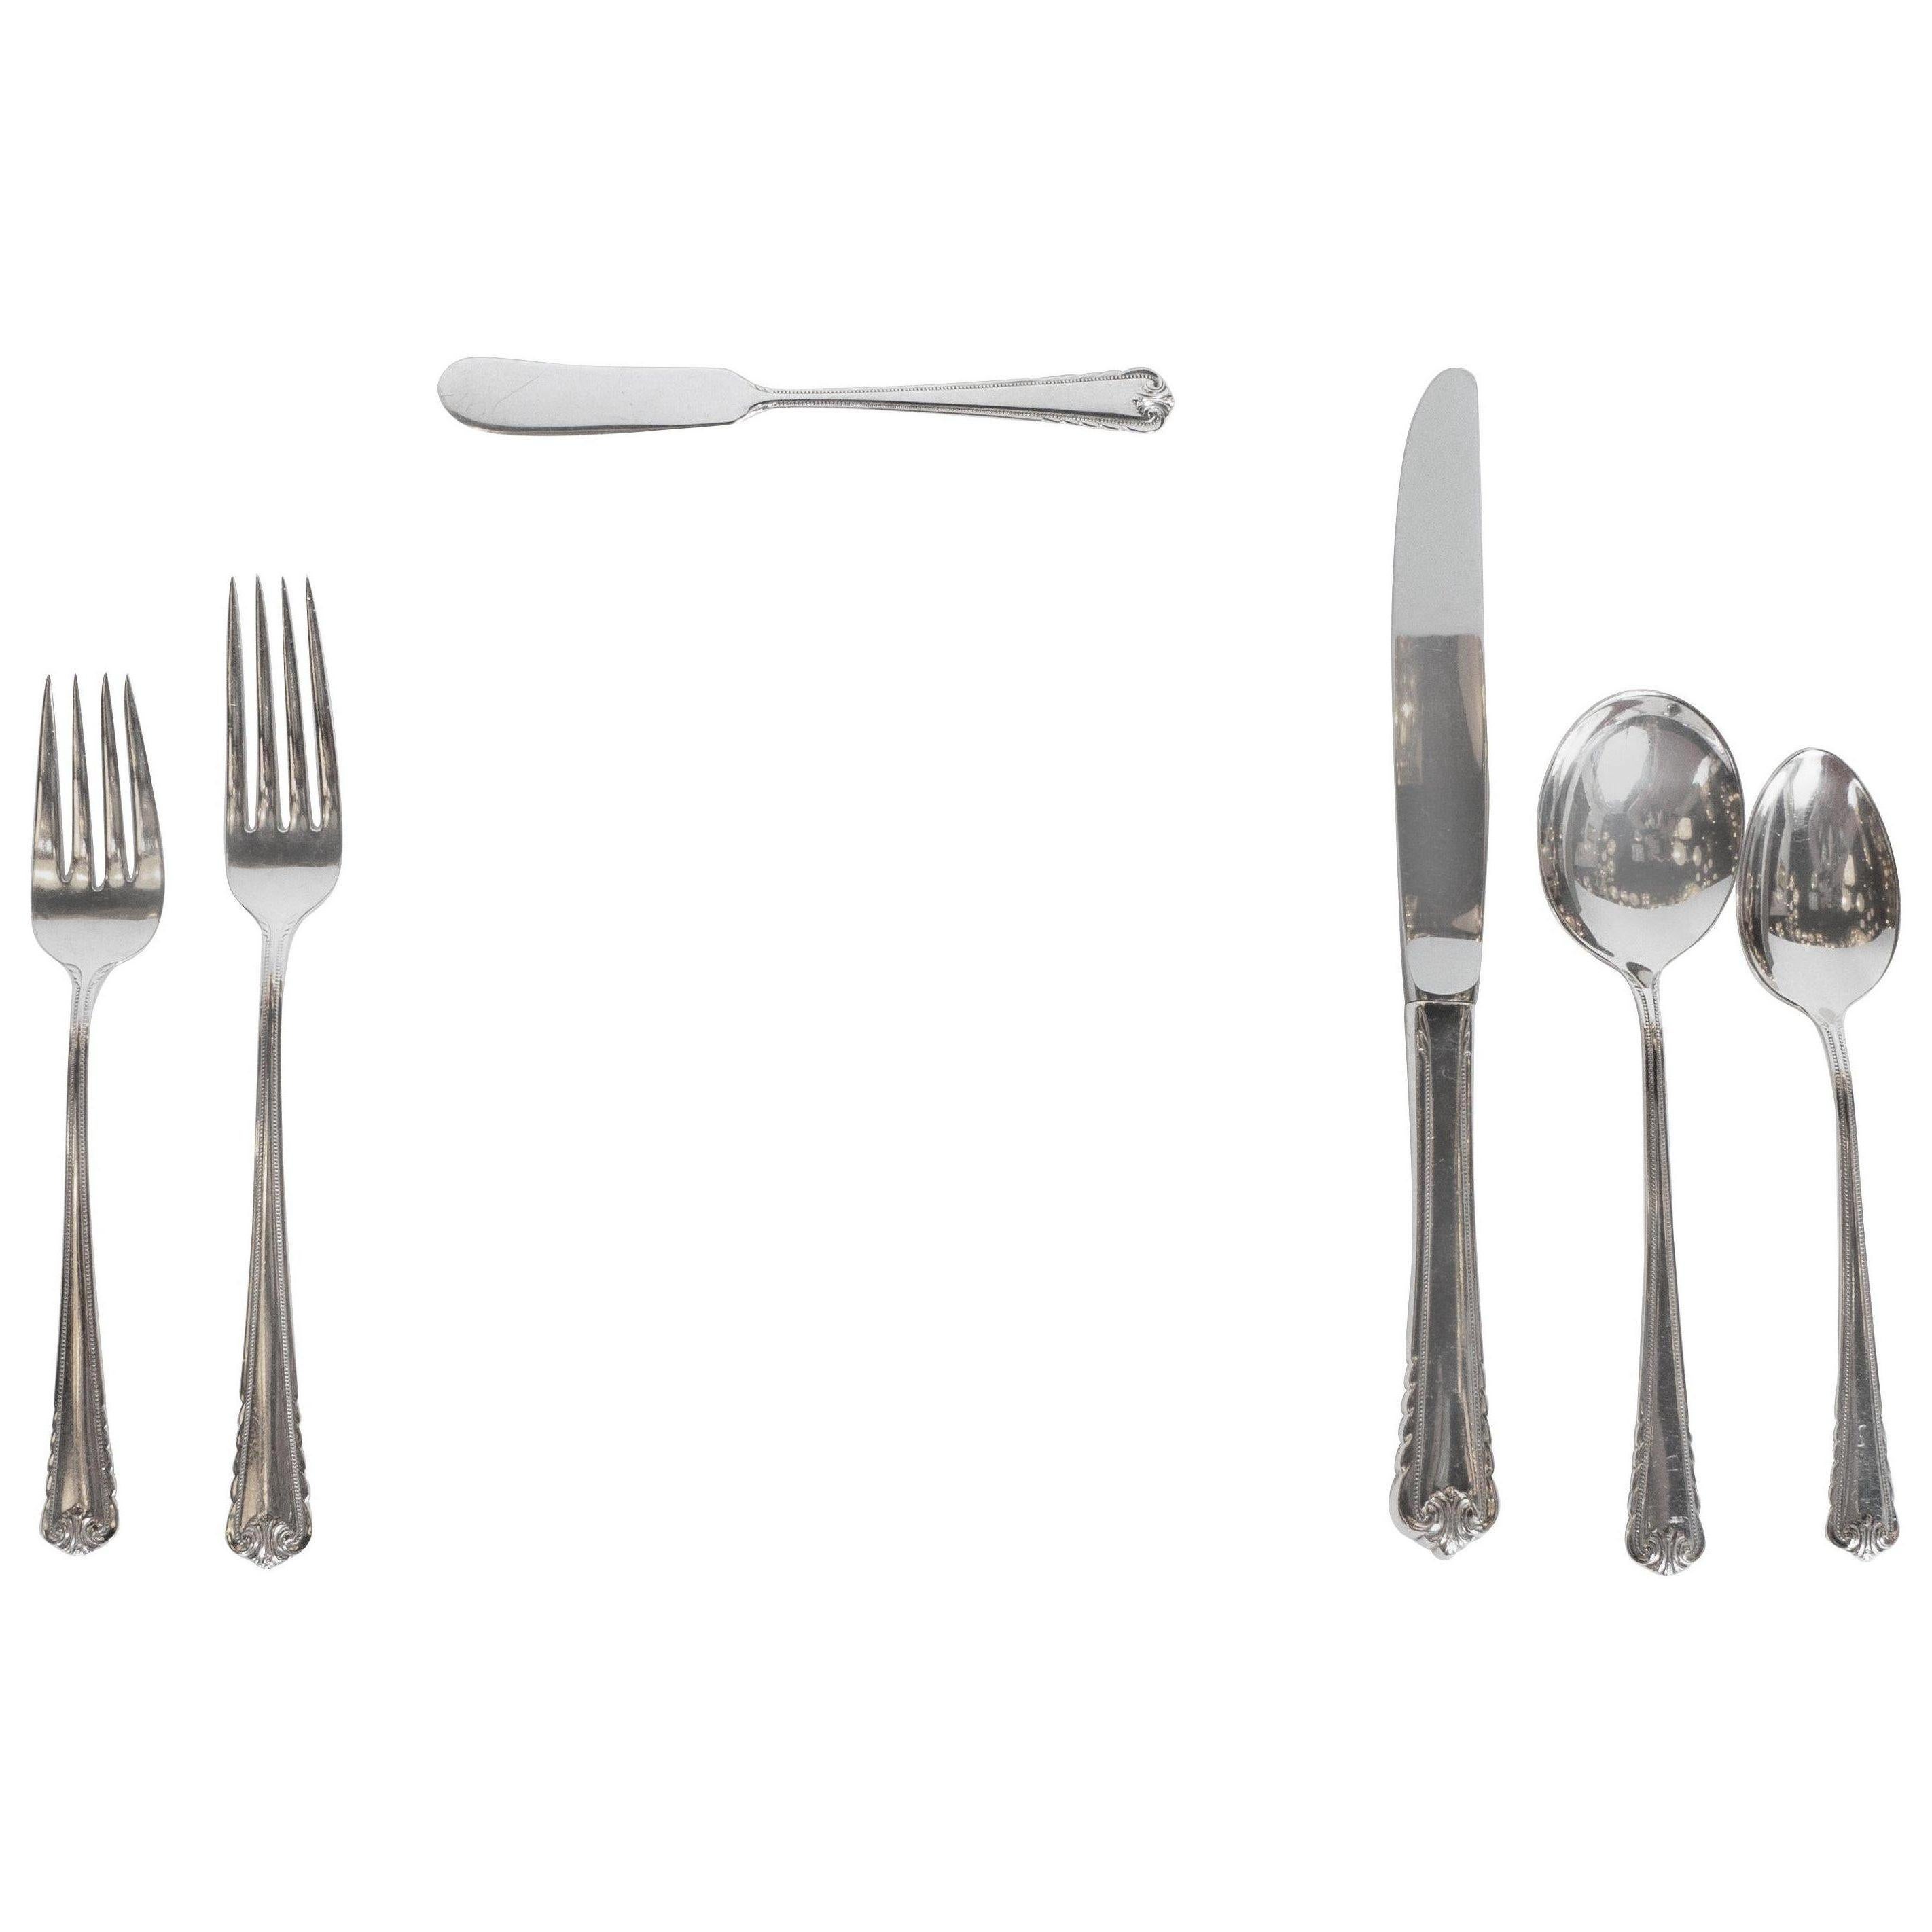 This beautiful Art Deco sterling silver set, realized in a neoclassical style, is a complete set for eight guests, including eight of the following: soup spoons, butter knives, tea spoons, salad forks, as well as dinner knives and forks. All feature